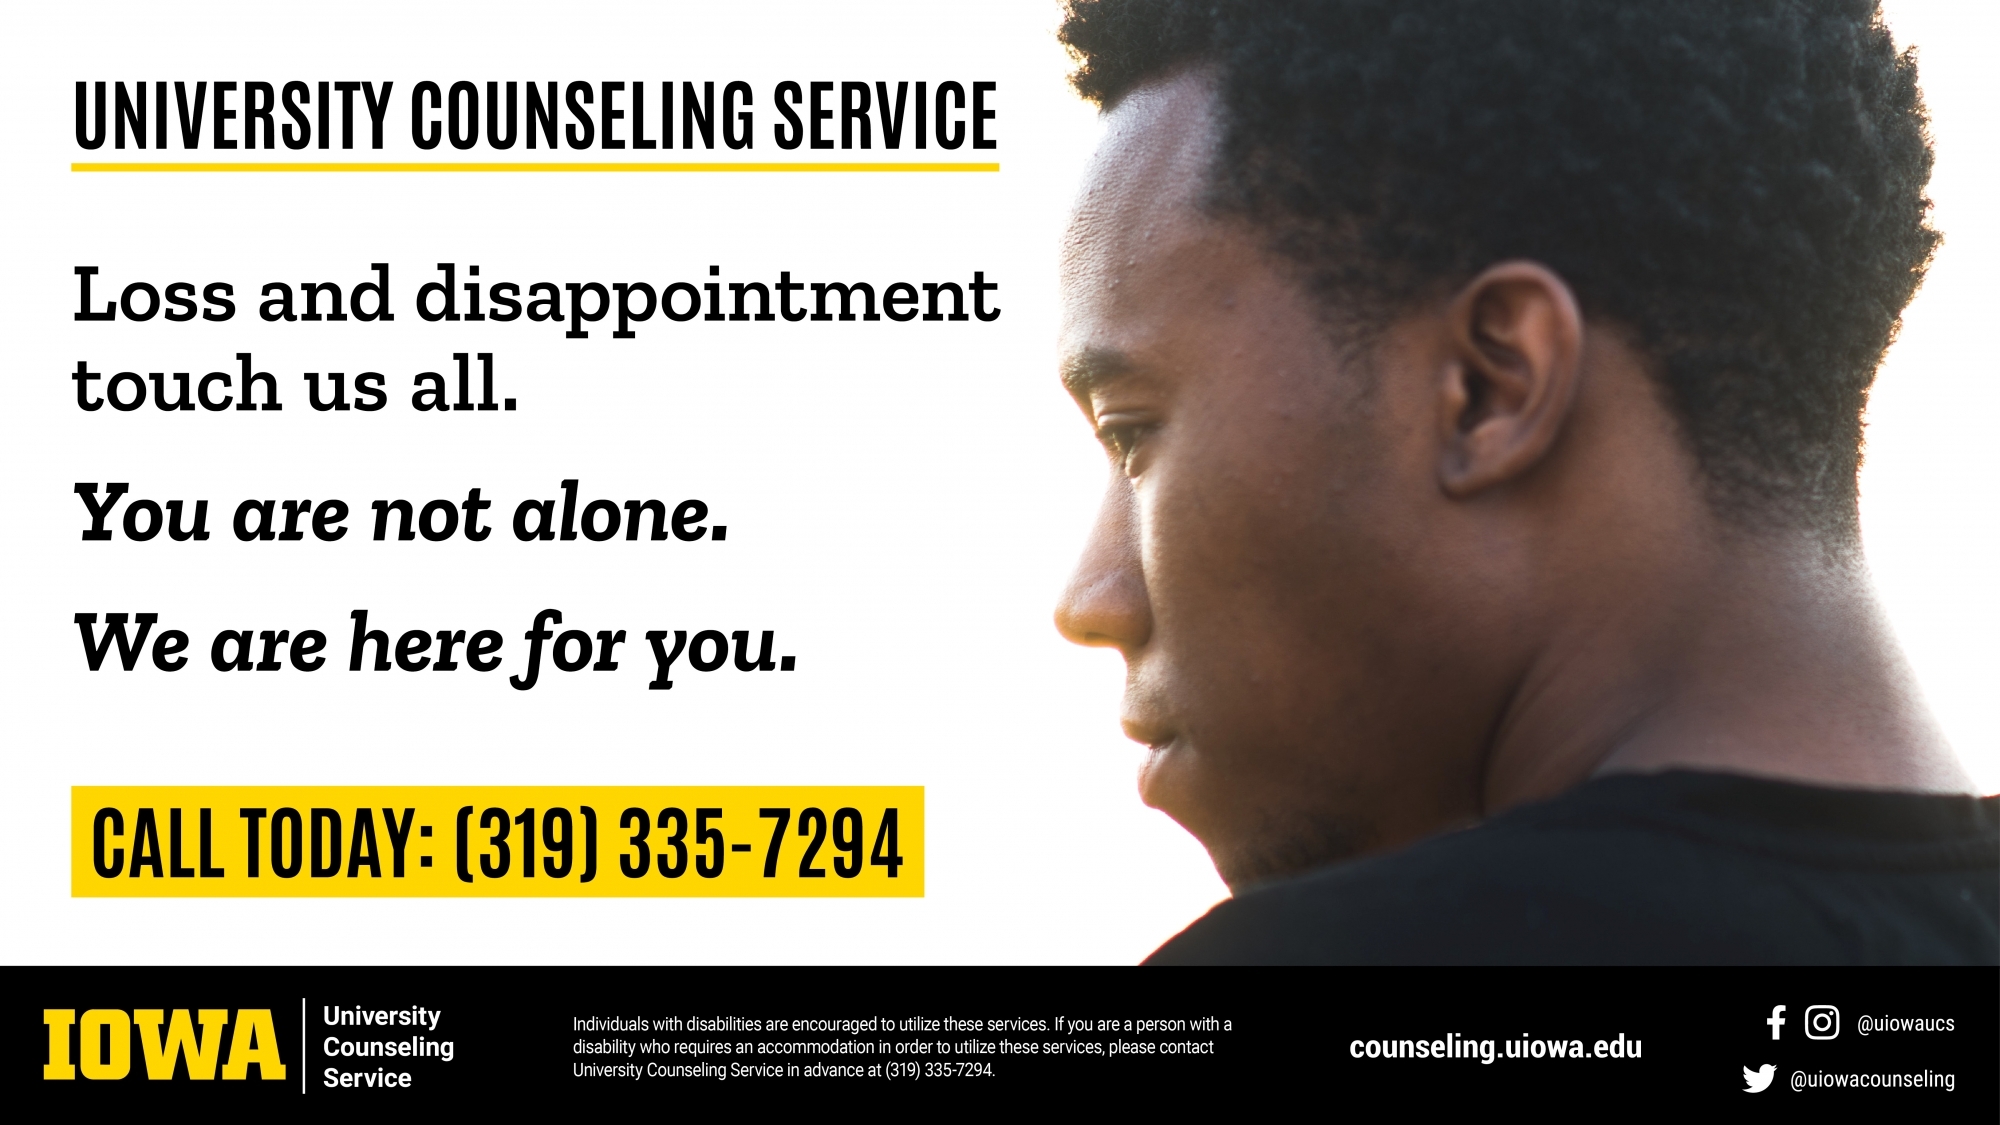 University Counseling Service. Loss and disappointment touch us all. You are not along. We are here for you. Call today: (319) 335-7294. IOWA | University Counseling Service. Individuals with disabilities are encouraged to utilize these services. If you are a person with a disability who requires an accommodation in order to utilize these services, please contact University Counseling Service in advance at 335-7294. counseling.uiowa.edu Facebook/Instagram: @Uiowaucs Twitter: @uiowacounseling